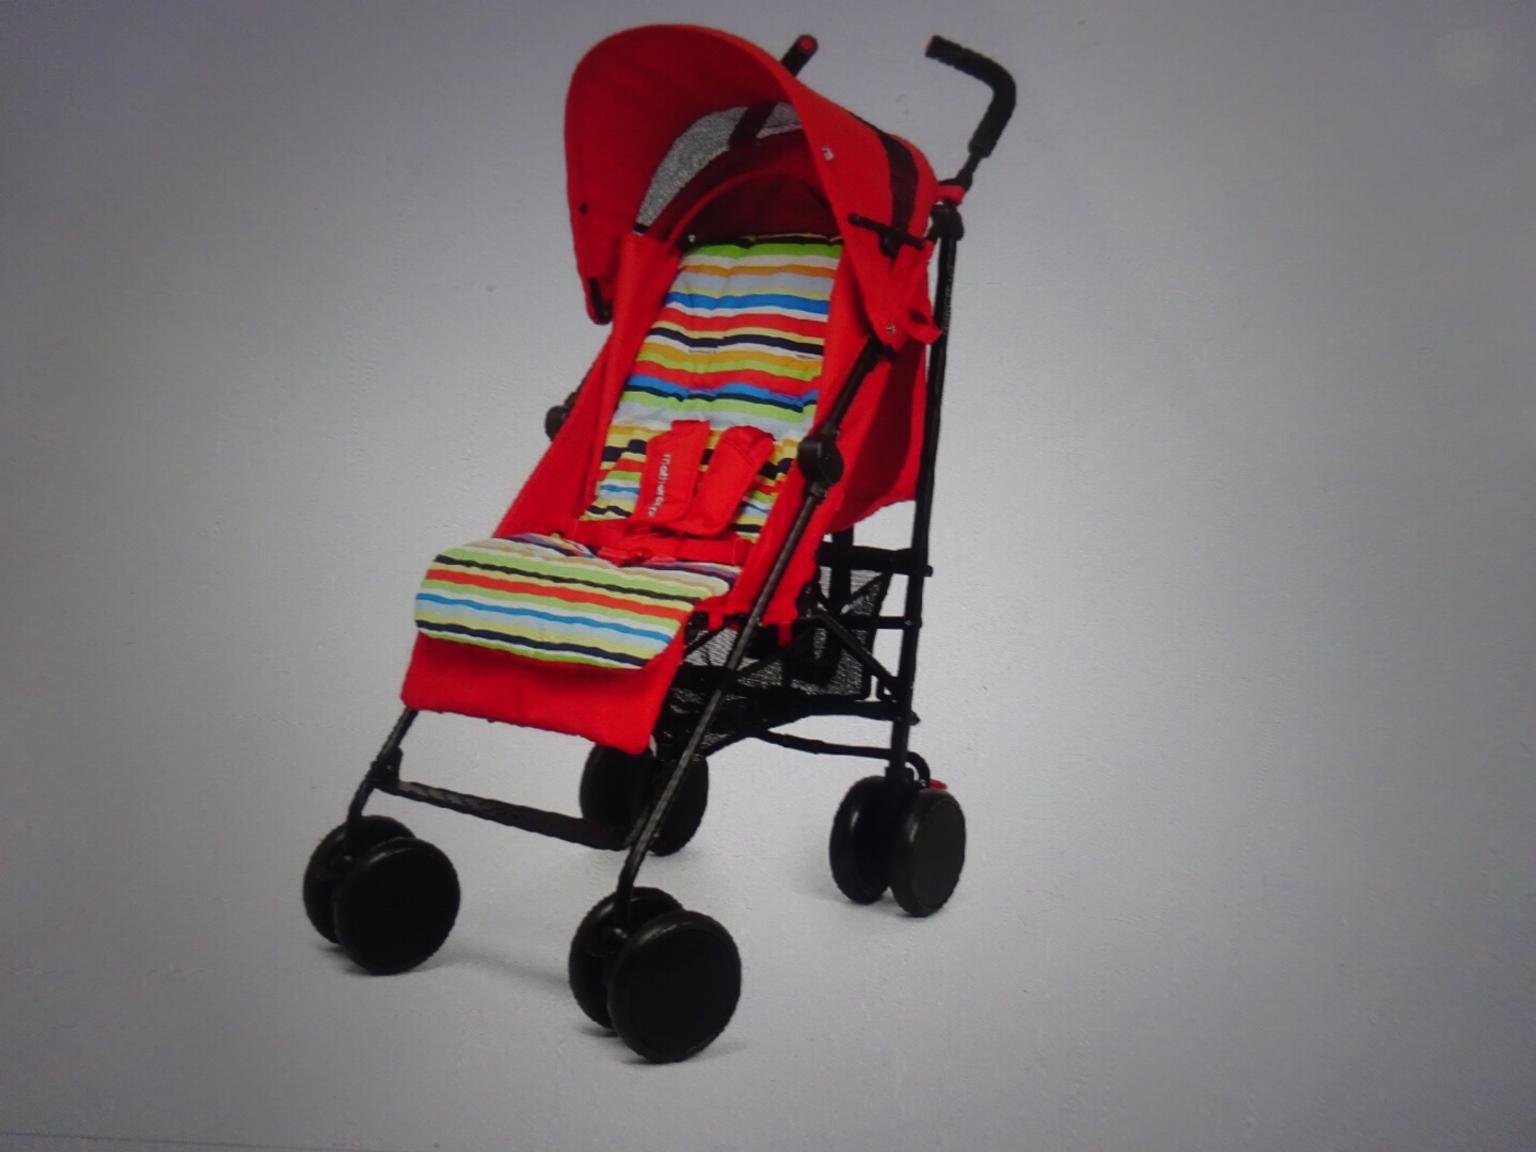 mothercare red stroller